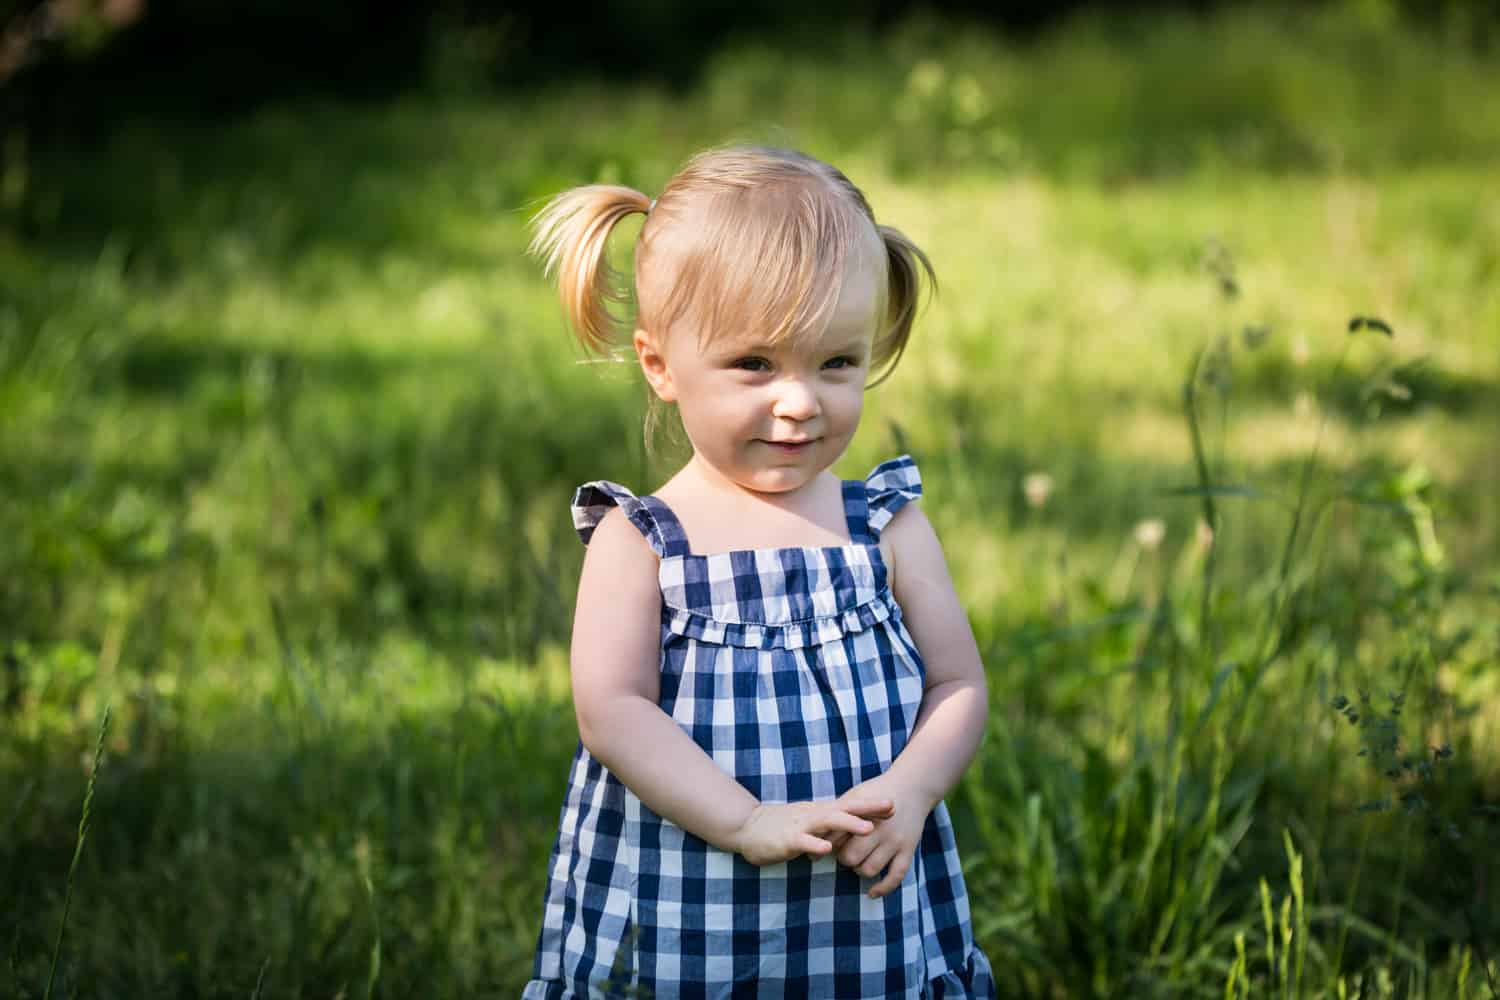 Little girl wearing blue and white gingham dress in Forest Park for an article on toddler portrait tips